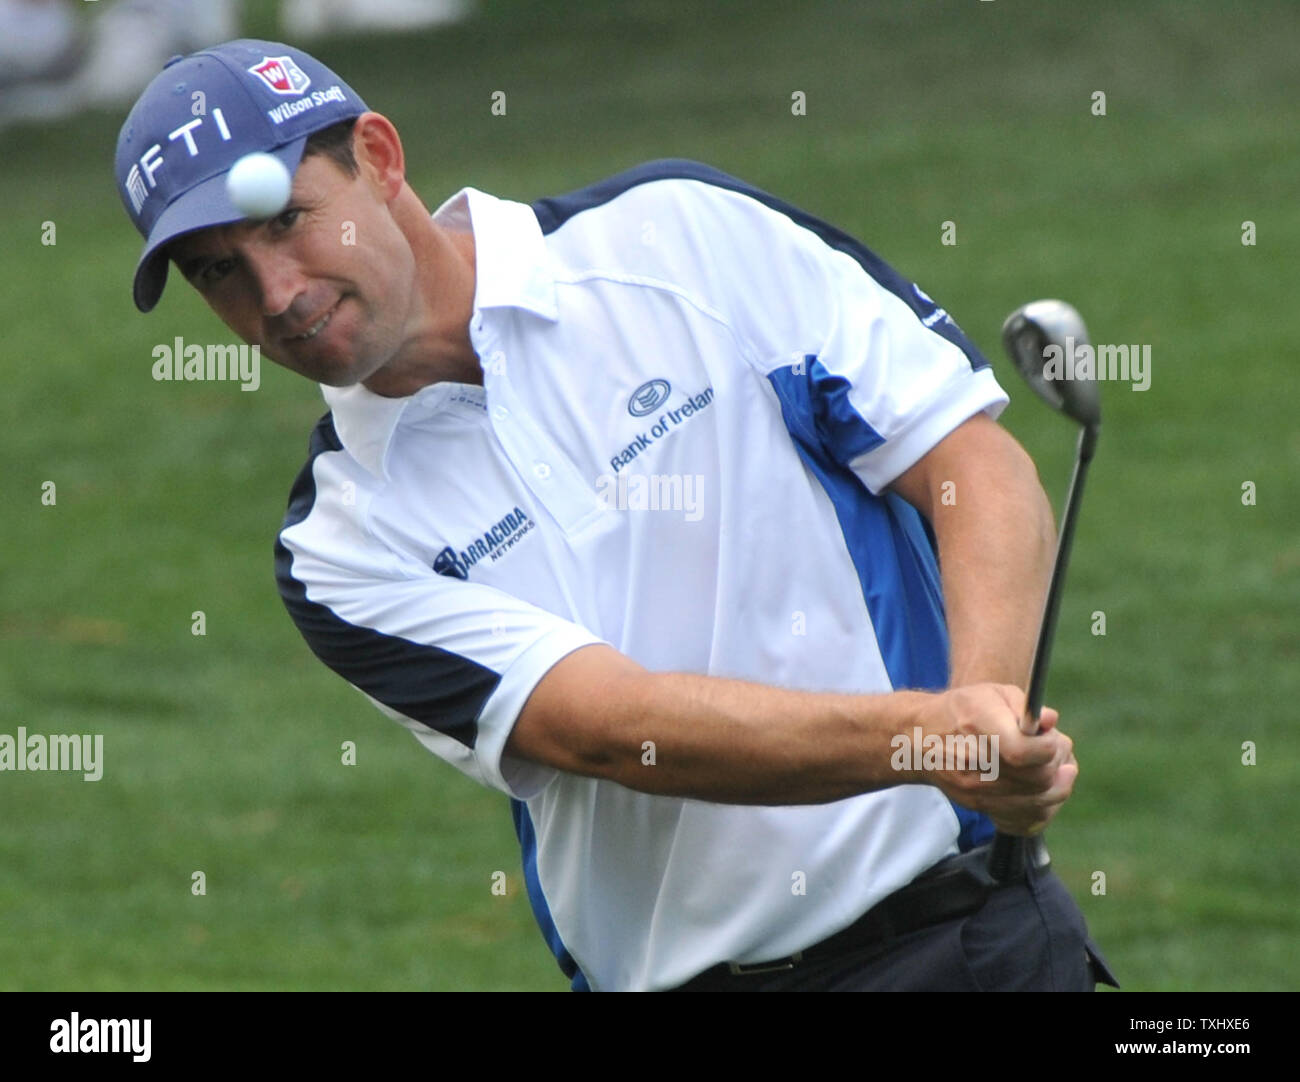 Padraig Harrington chips on the 16th fairway during the fourth round of the Quail Hollow Tournament in Charlotte, North Carolina on May 2, 2010.   UPI/Kevin Dietsch Stock Photo